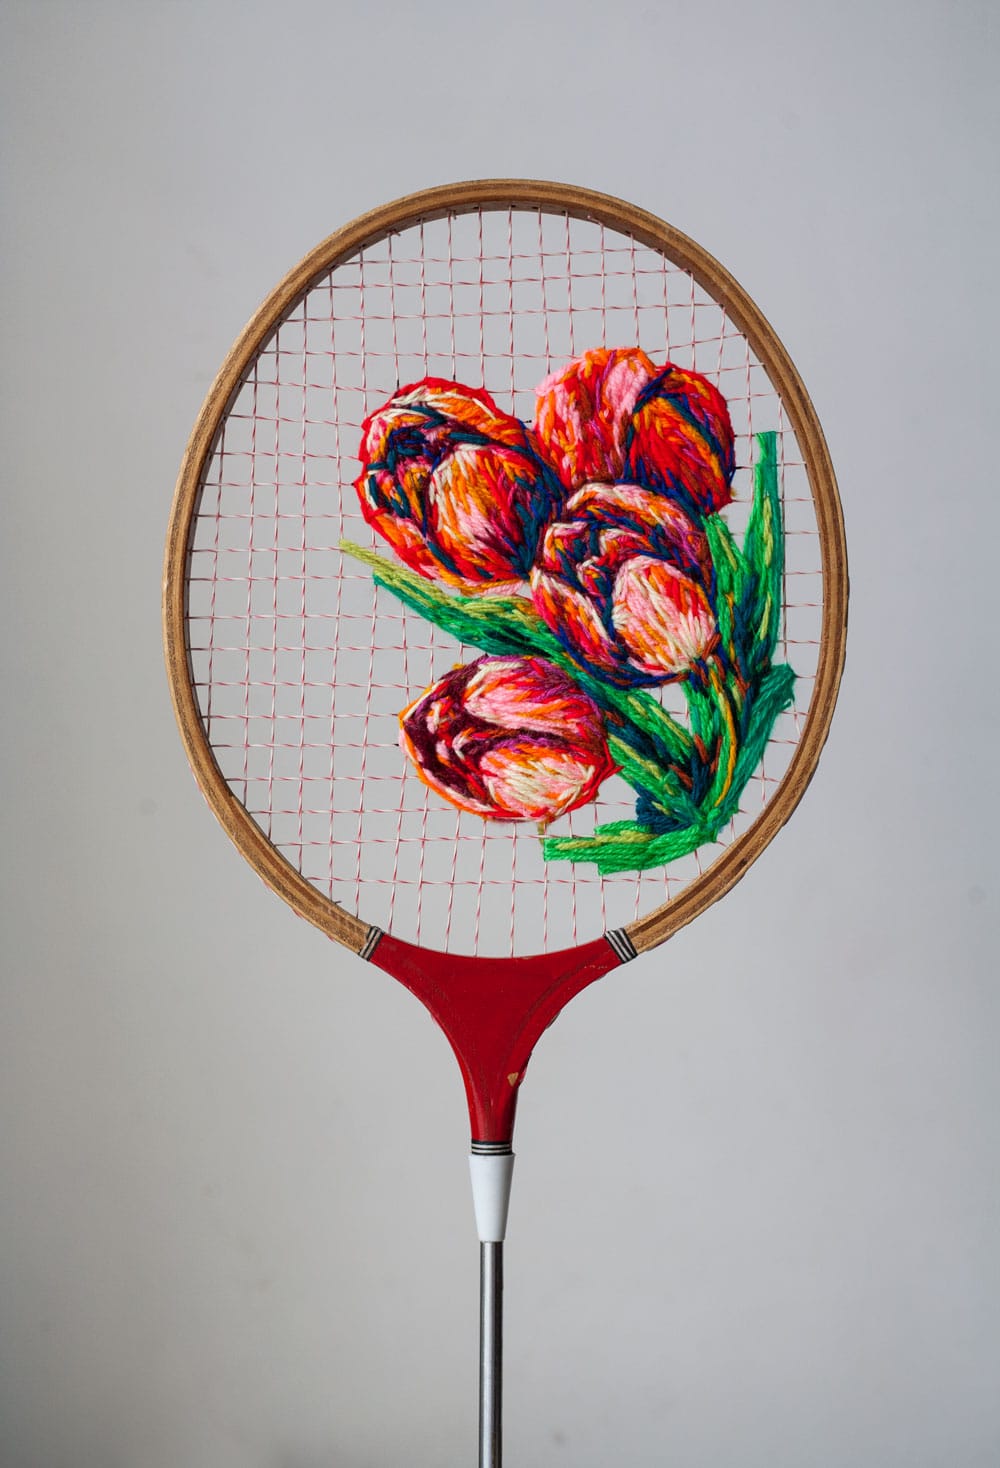 Bright sunny embroidery to melt away the winter blues. Includes spring flowers and animals.